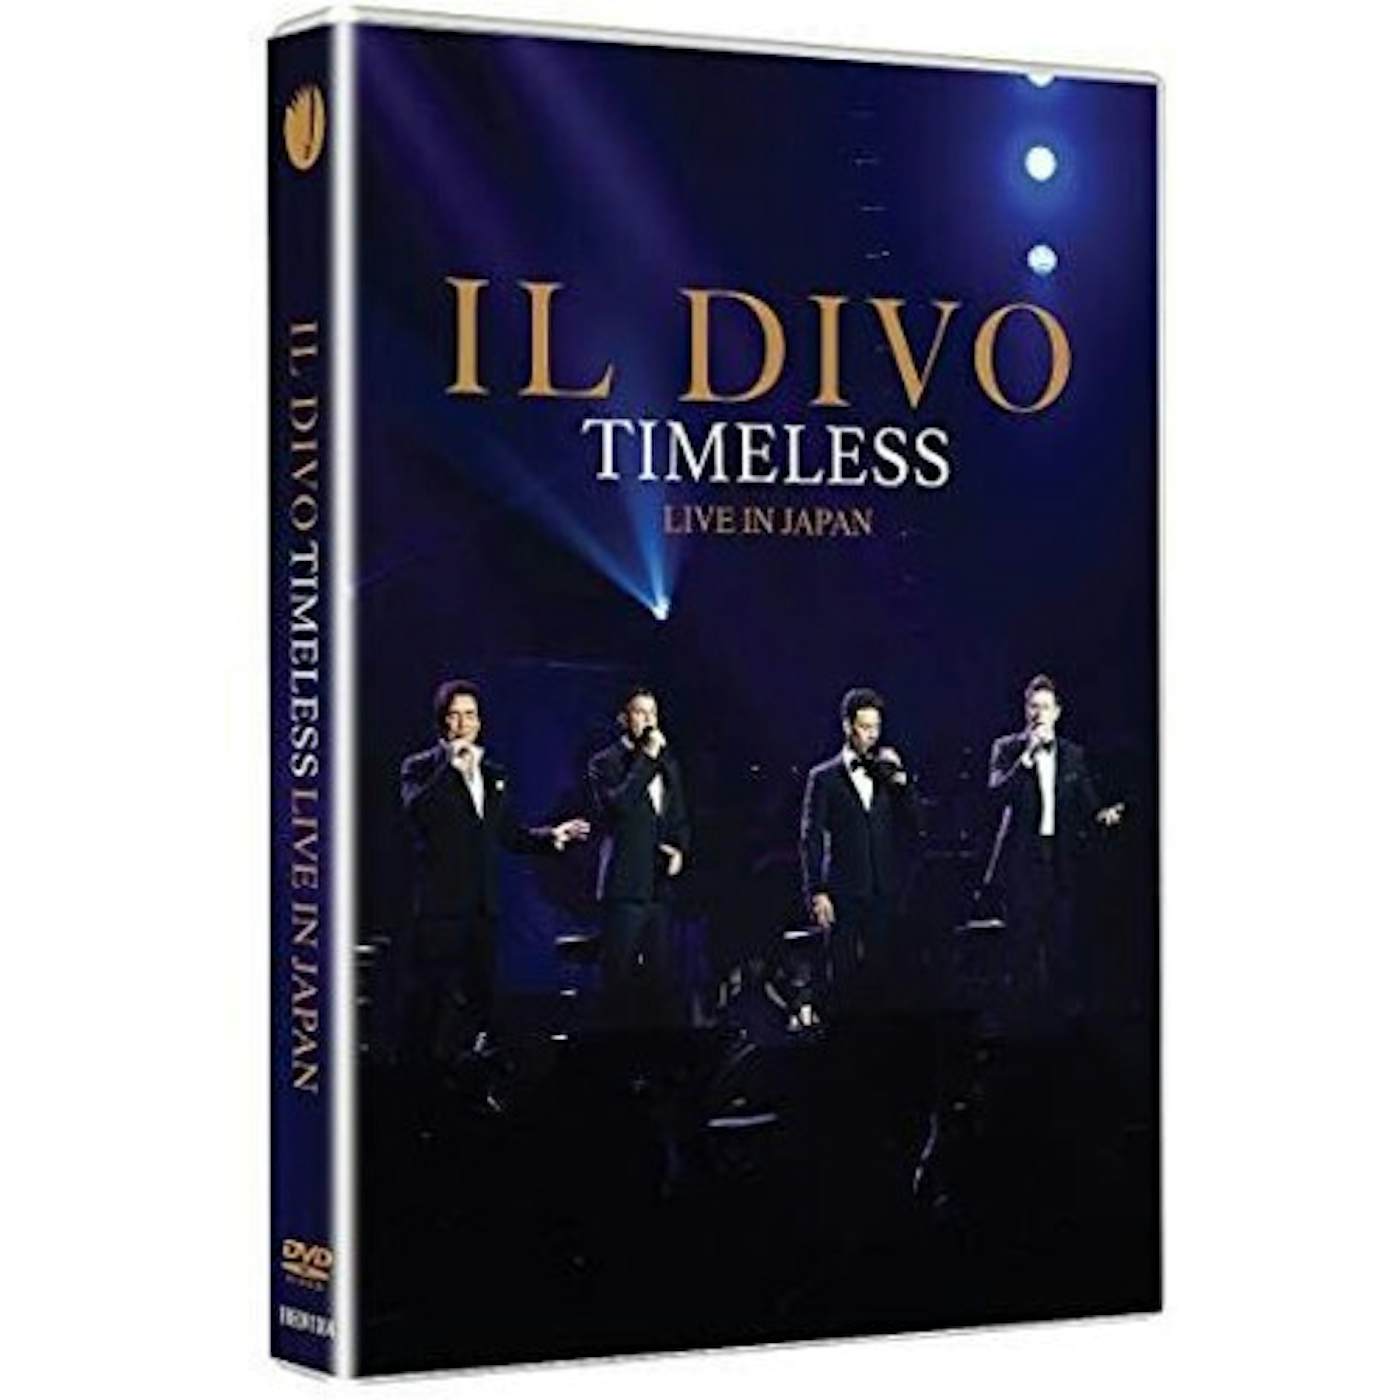 Il Divo TIMELESS LIVE IN JAPAN DVD